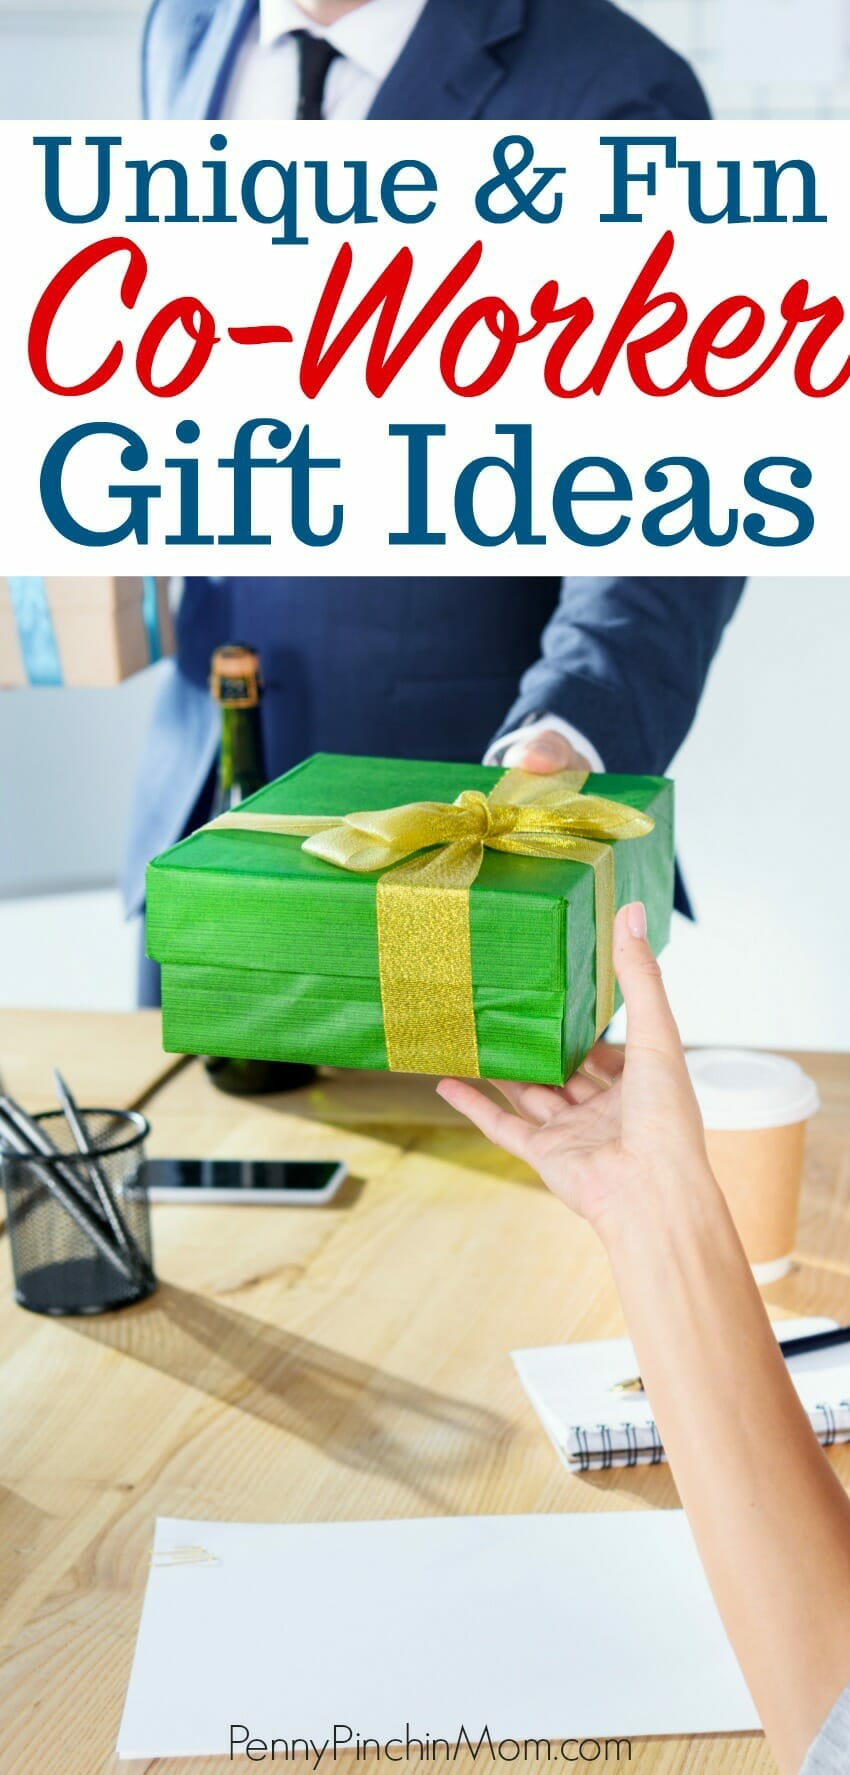 Holiday Gift Ideas For Staff
 Co Worker Gift Ideas for Anyone on Your List This Year